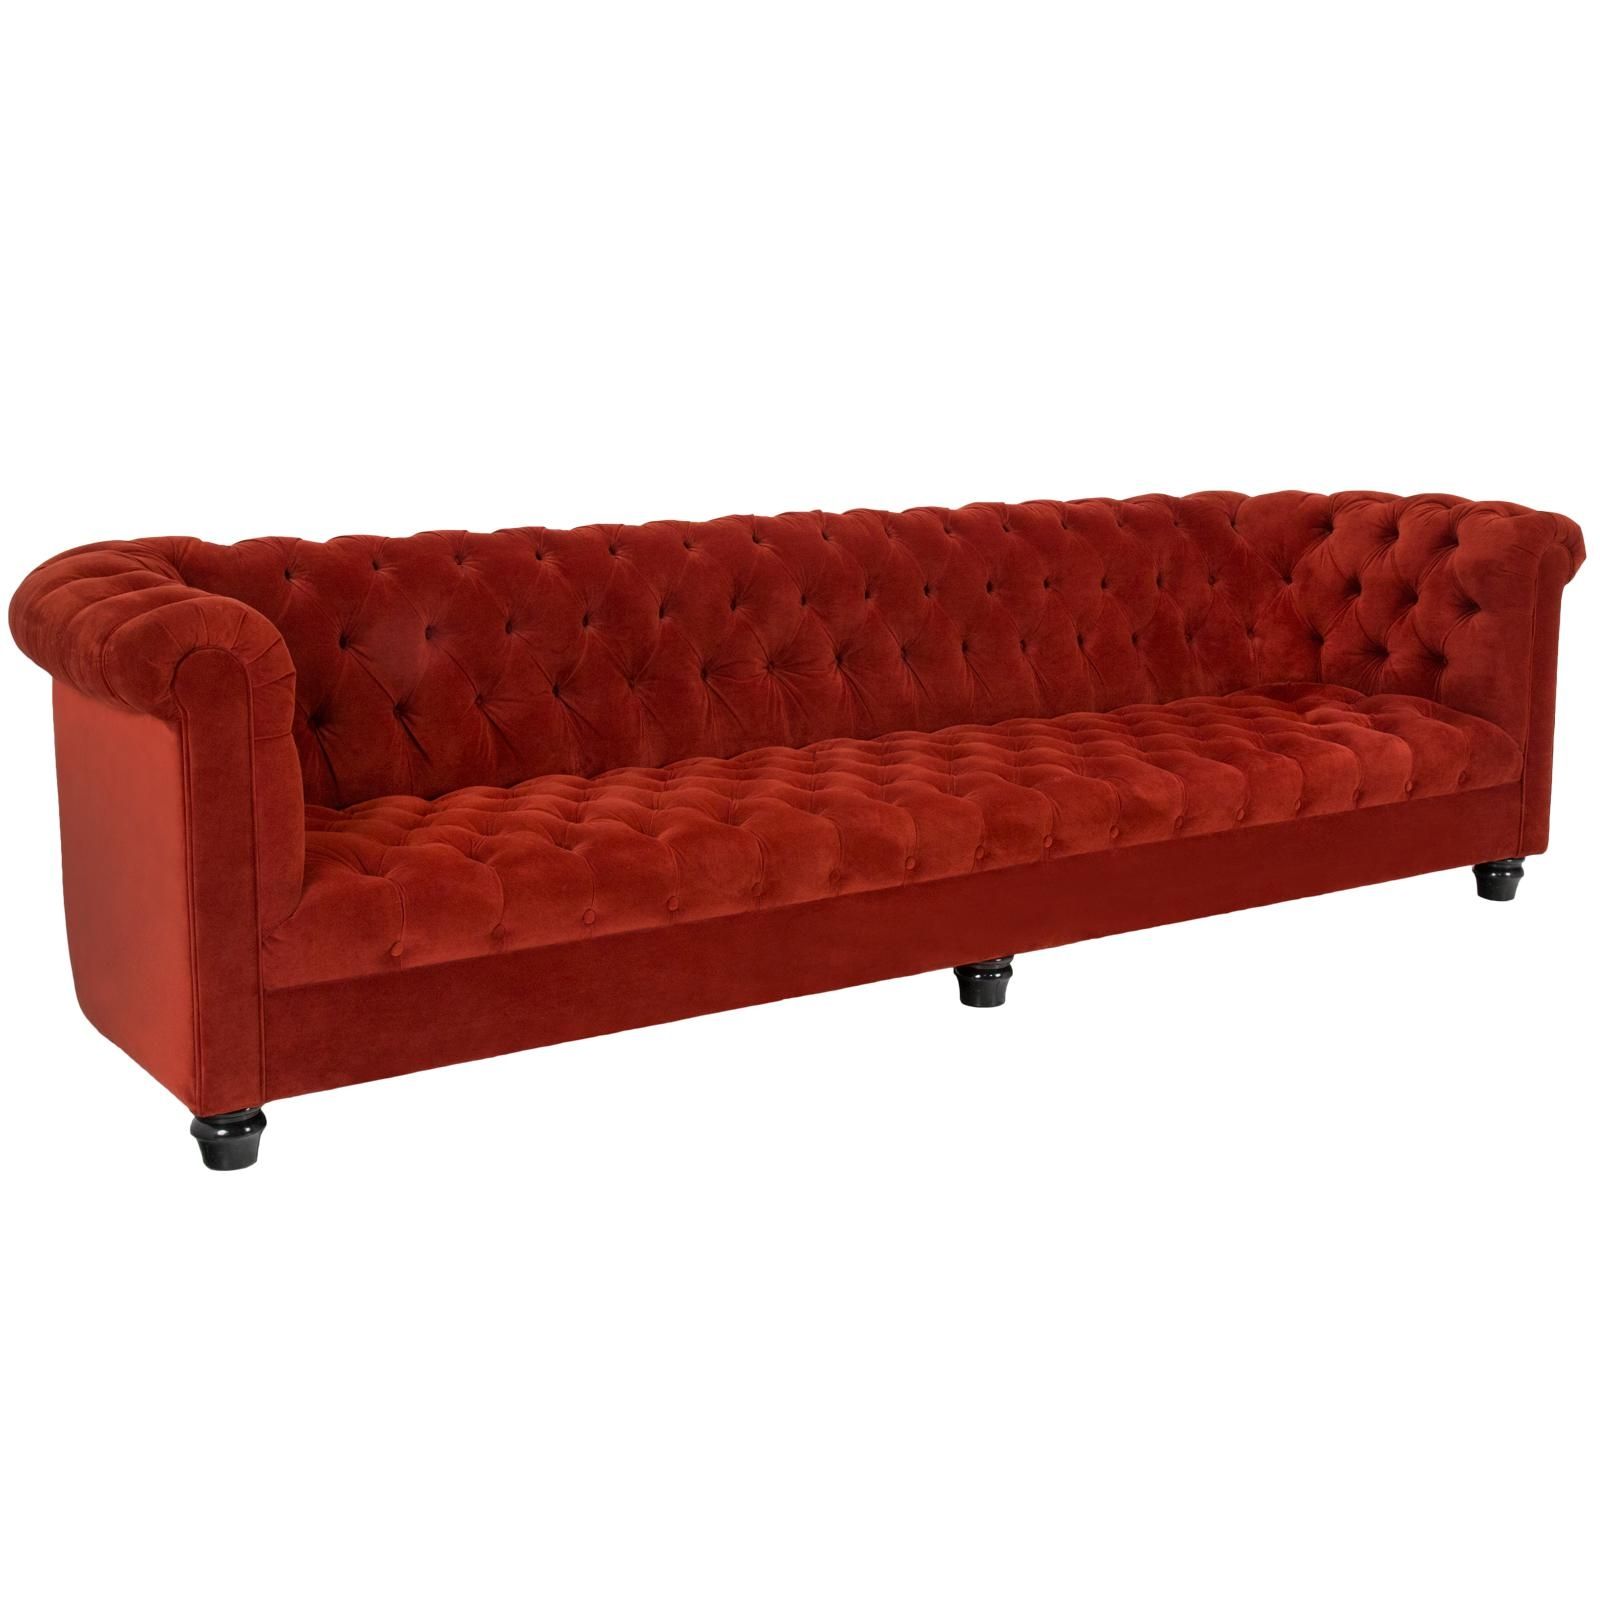 Tufted Sofa Rentals | Event Furniture Rental Within Manchester Sofas (View 3 of 20)